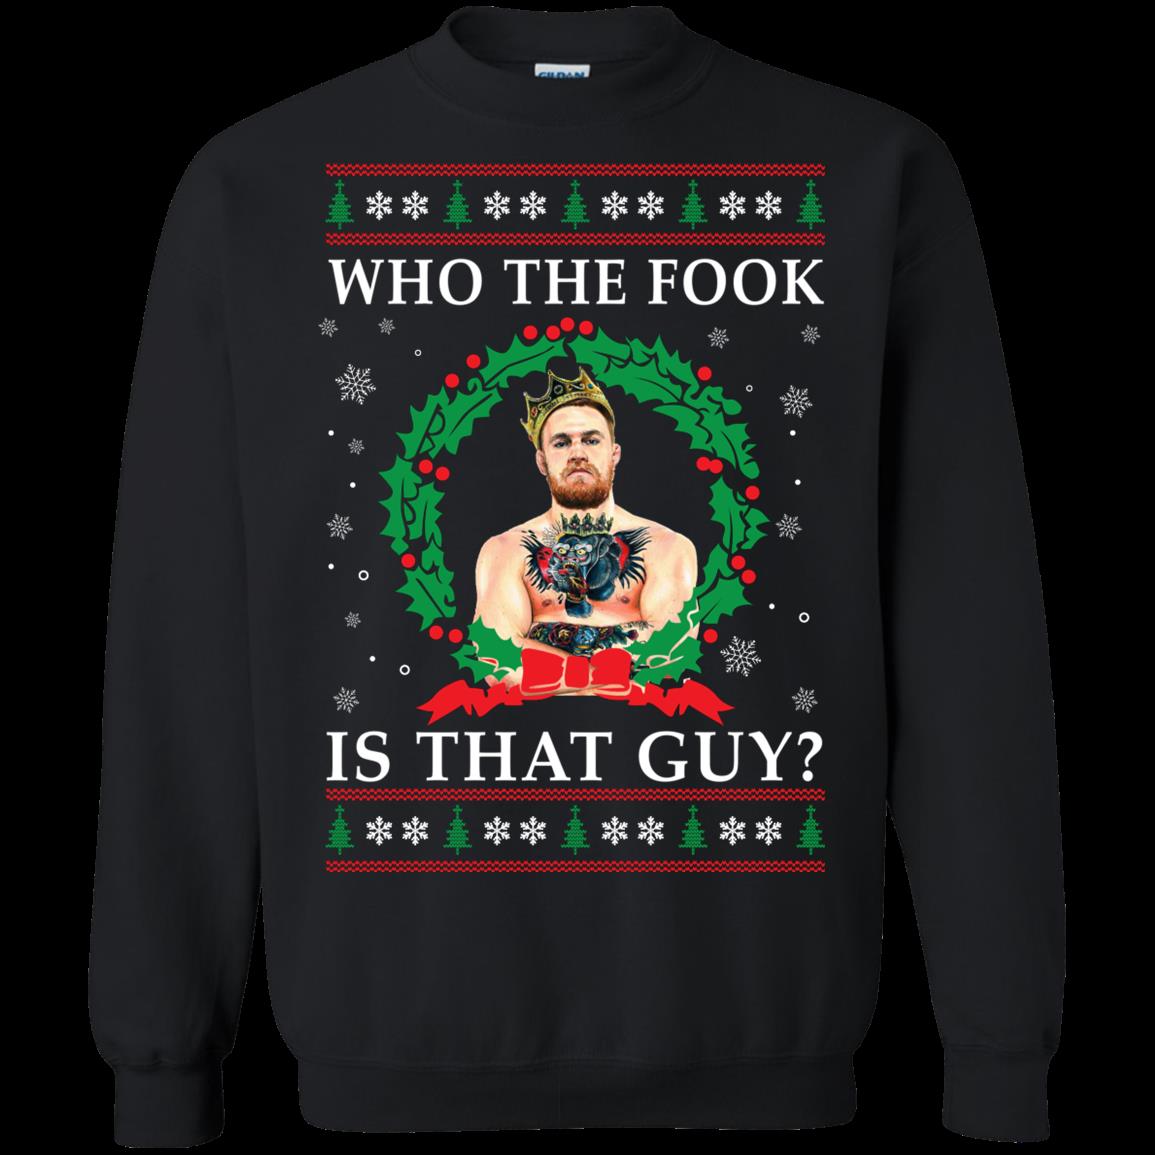 S Ufc Conor Mcgregor Ugly Christmas Sweater Shirts Who The Fook Is That Guy T Shirt Hoodies Sweatshirt